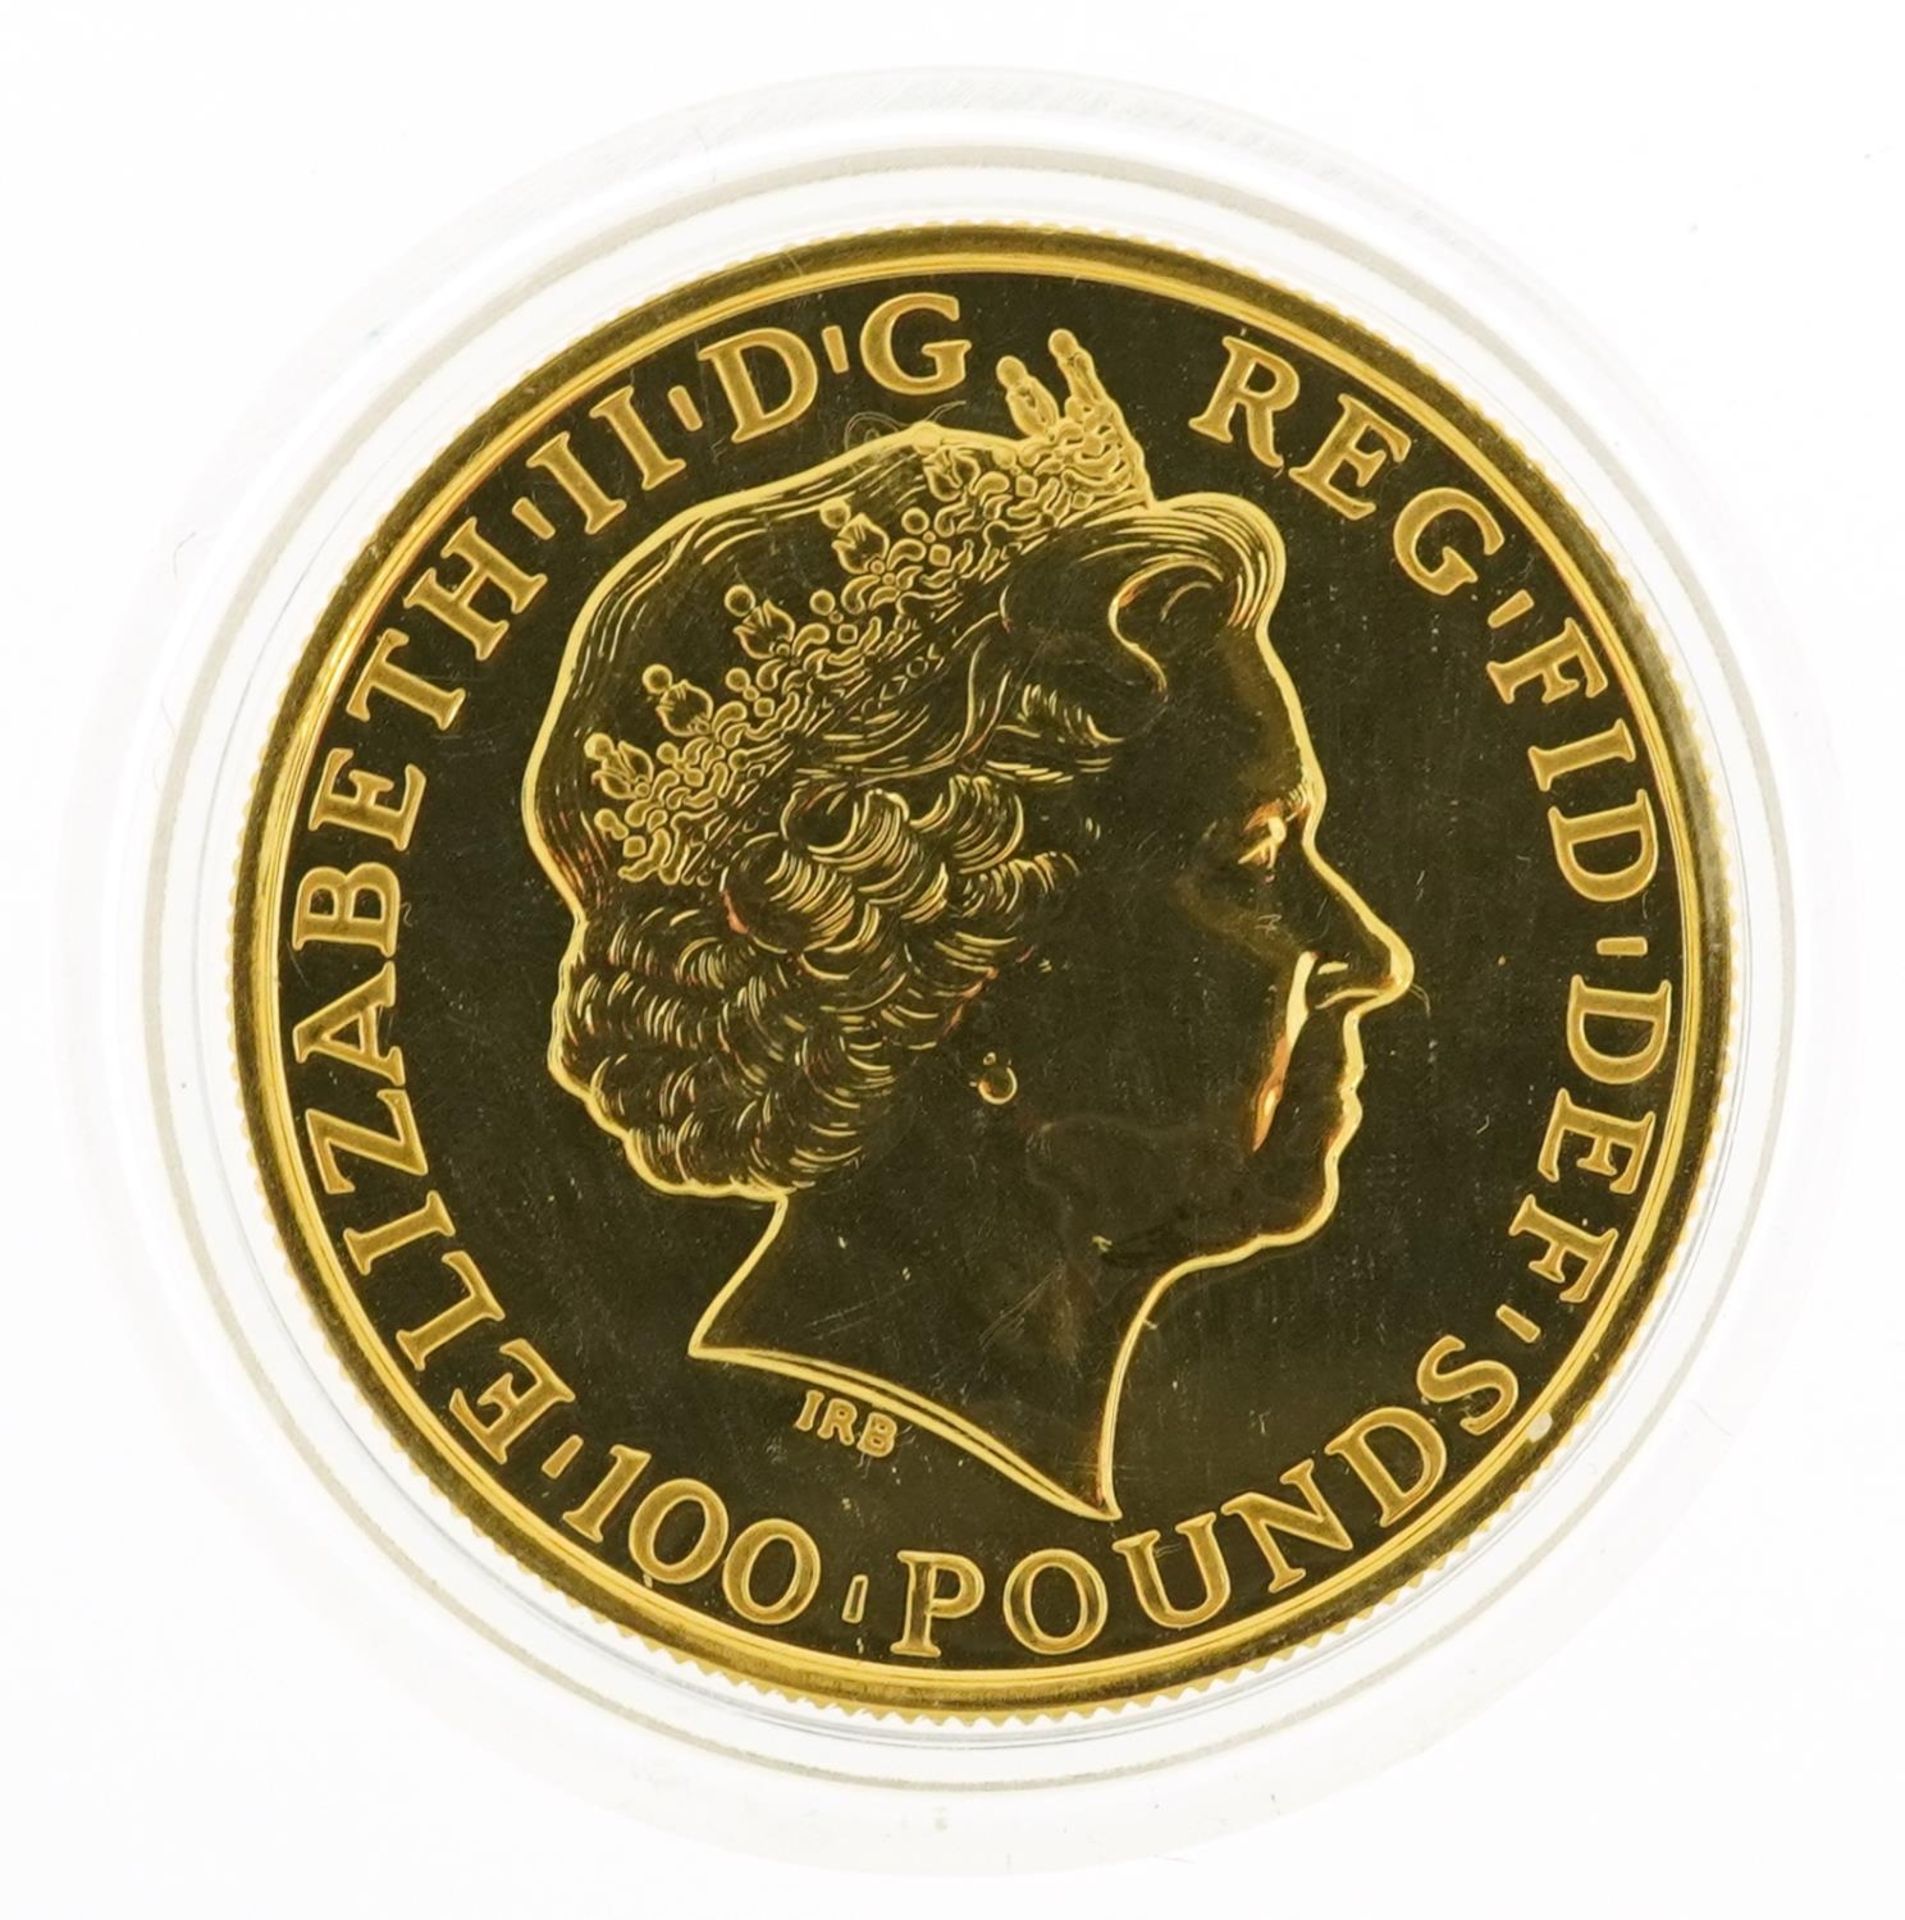 Elizabeth II 2015 Year of the Sheep one ounce fine gold one hundred pound coin - Image 2 of 2